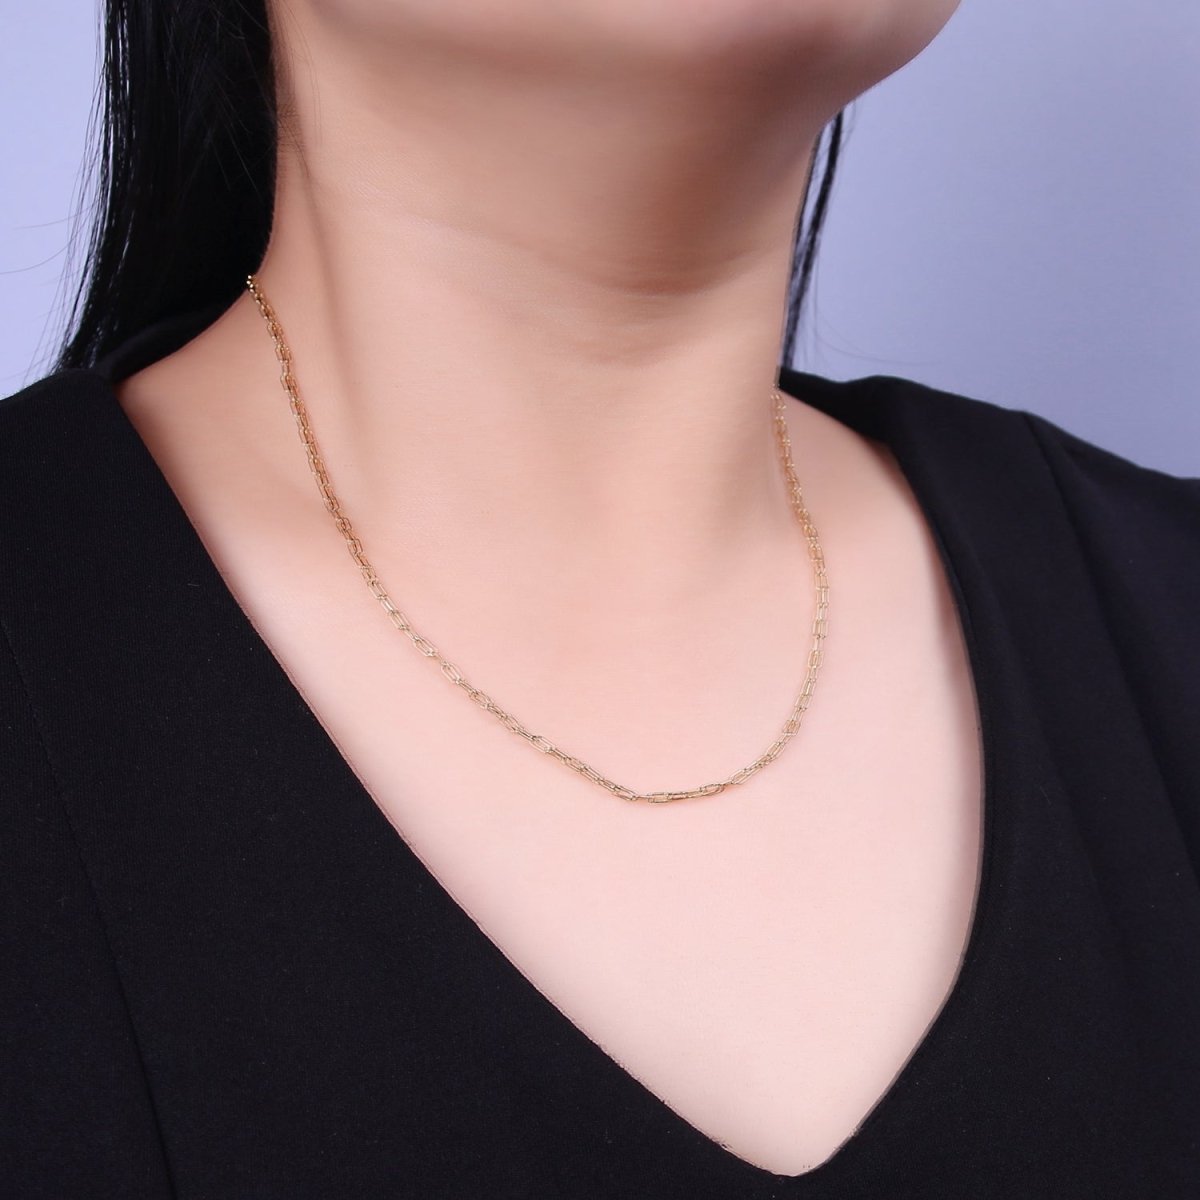 Dainty Paper Clip Chain Necklace ∙ 14K Gold Filled Necklace Cable Link Chain 18 inch + 2.5 inch extender Ready to Wear WA2436 WA2437 WA2438 - DLUXCA